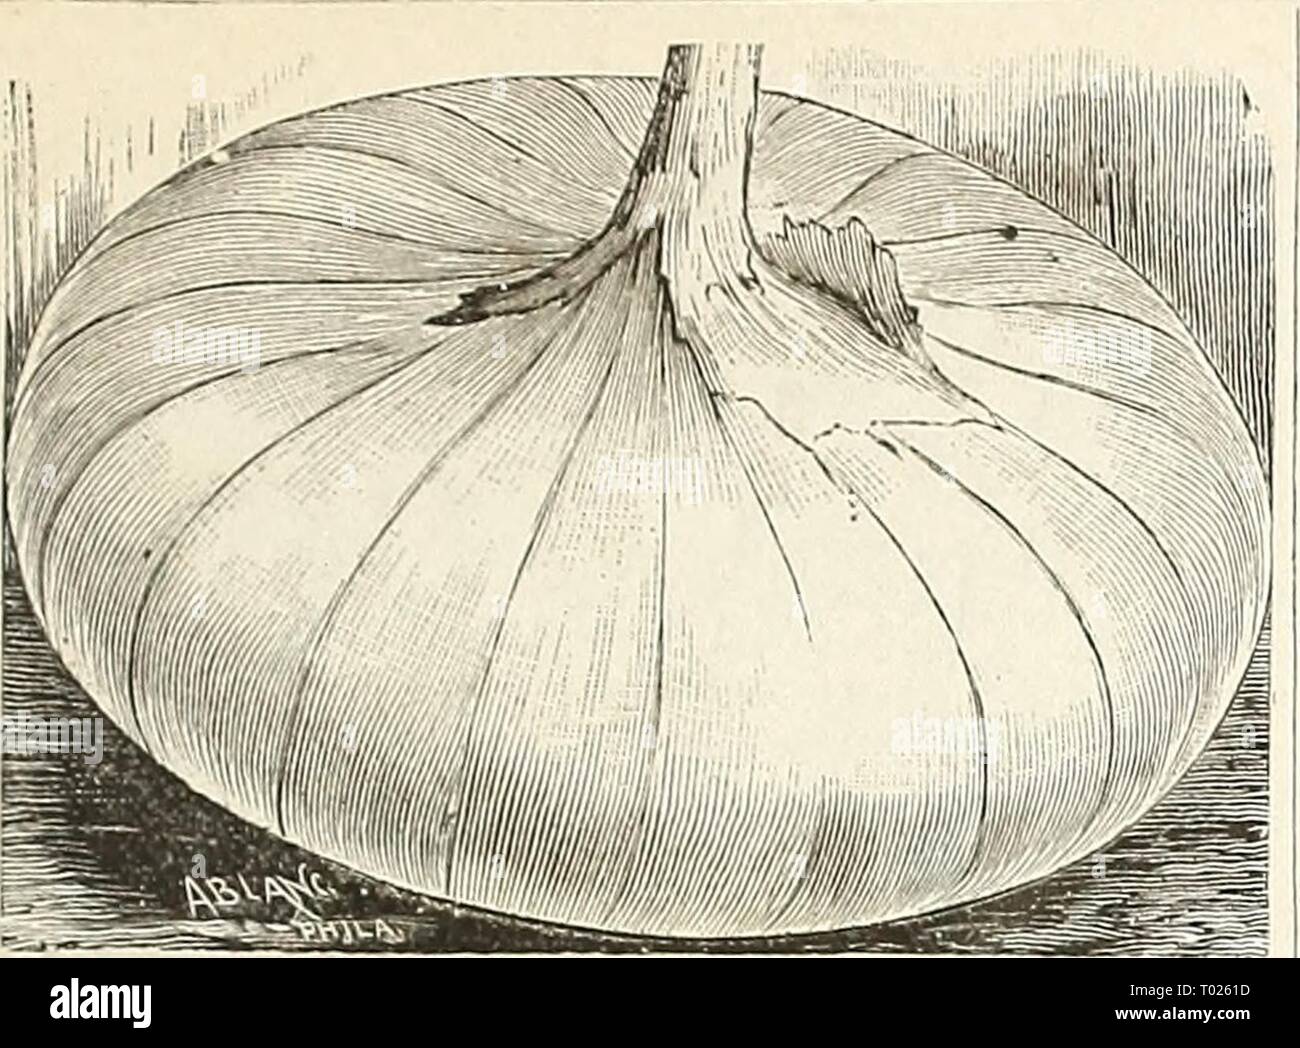 Dreer's garden calendar . dreersgardencale1890henr Year: 1890  FOR THE VEGETABLE GARDEN. 31    MAMMOTH SILVER KING. This is the largest of the wliite Italian Onions, and attains an enormous size in one season from seed. This sort is deserving of extensive cultivation, and will be found especially serviceable in the family garden, as it is of mild flavor, attractive appearance and form, and a good keeper. Pkt. 10 cts., oz. 30 ets.,  lb. SI.00, lb. $3.00. Stock Photo